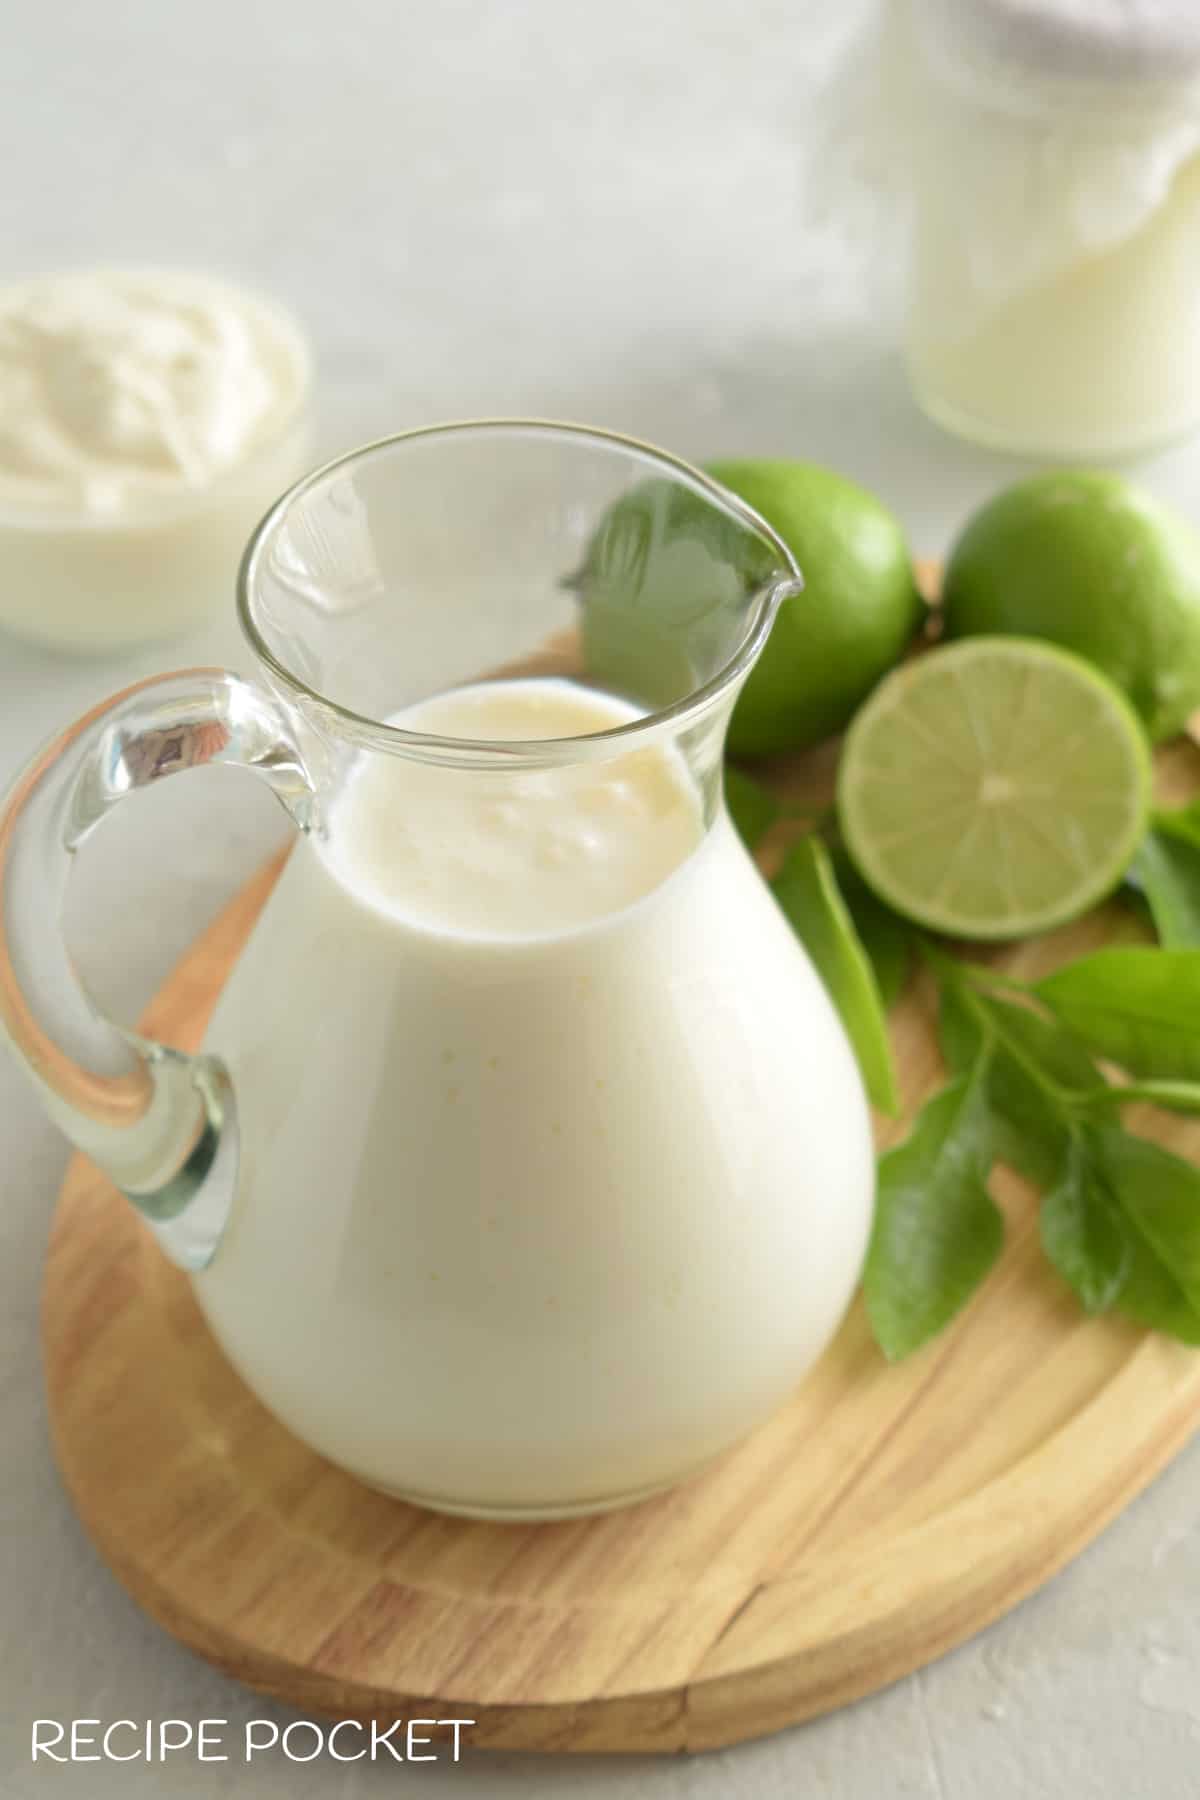 Hero image showing a jug of buttermilk for an article on what can you use instead of buttermillk.